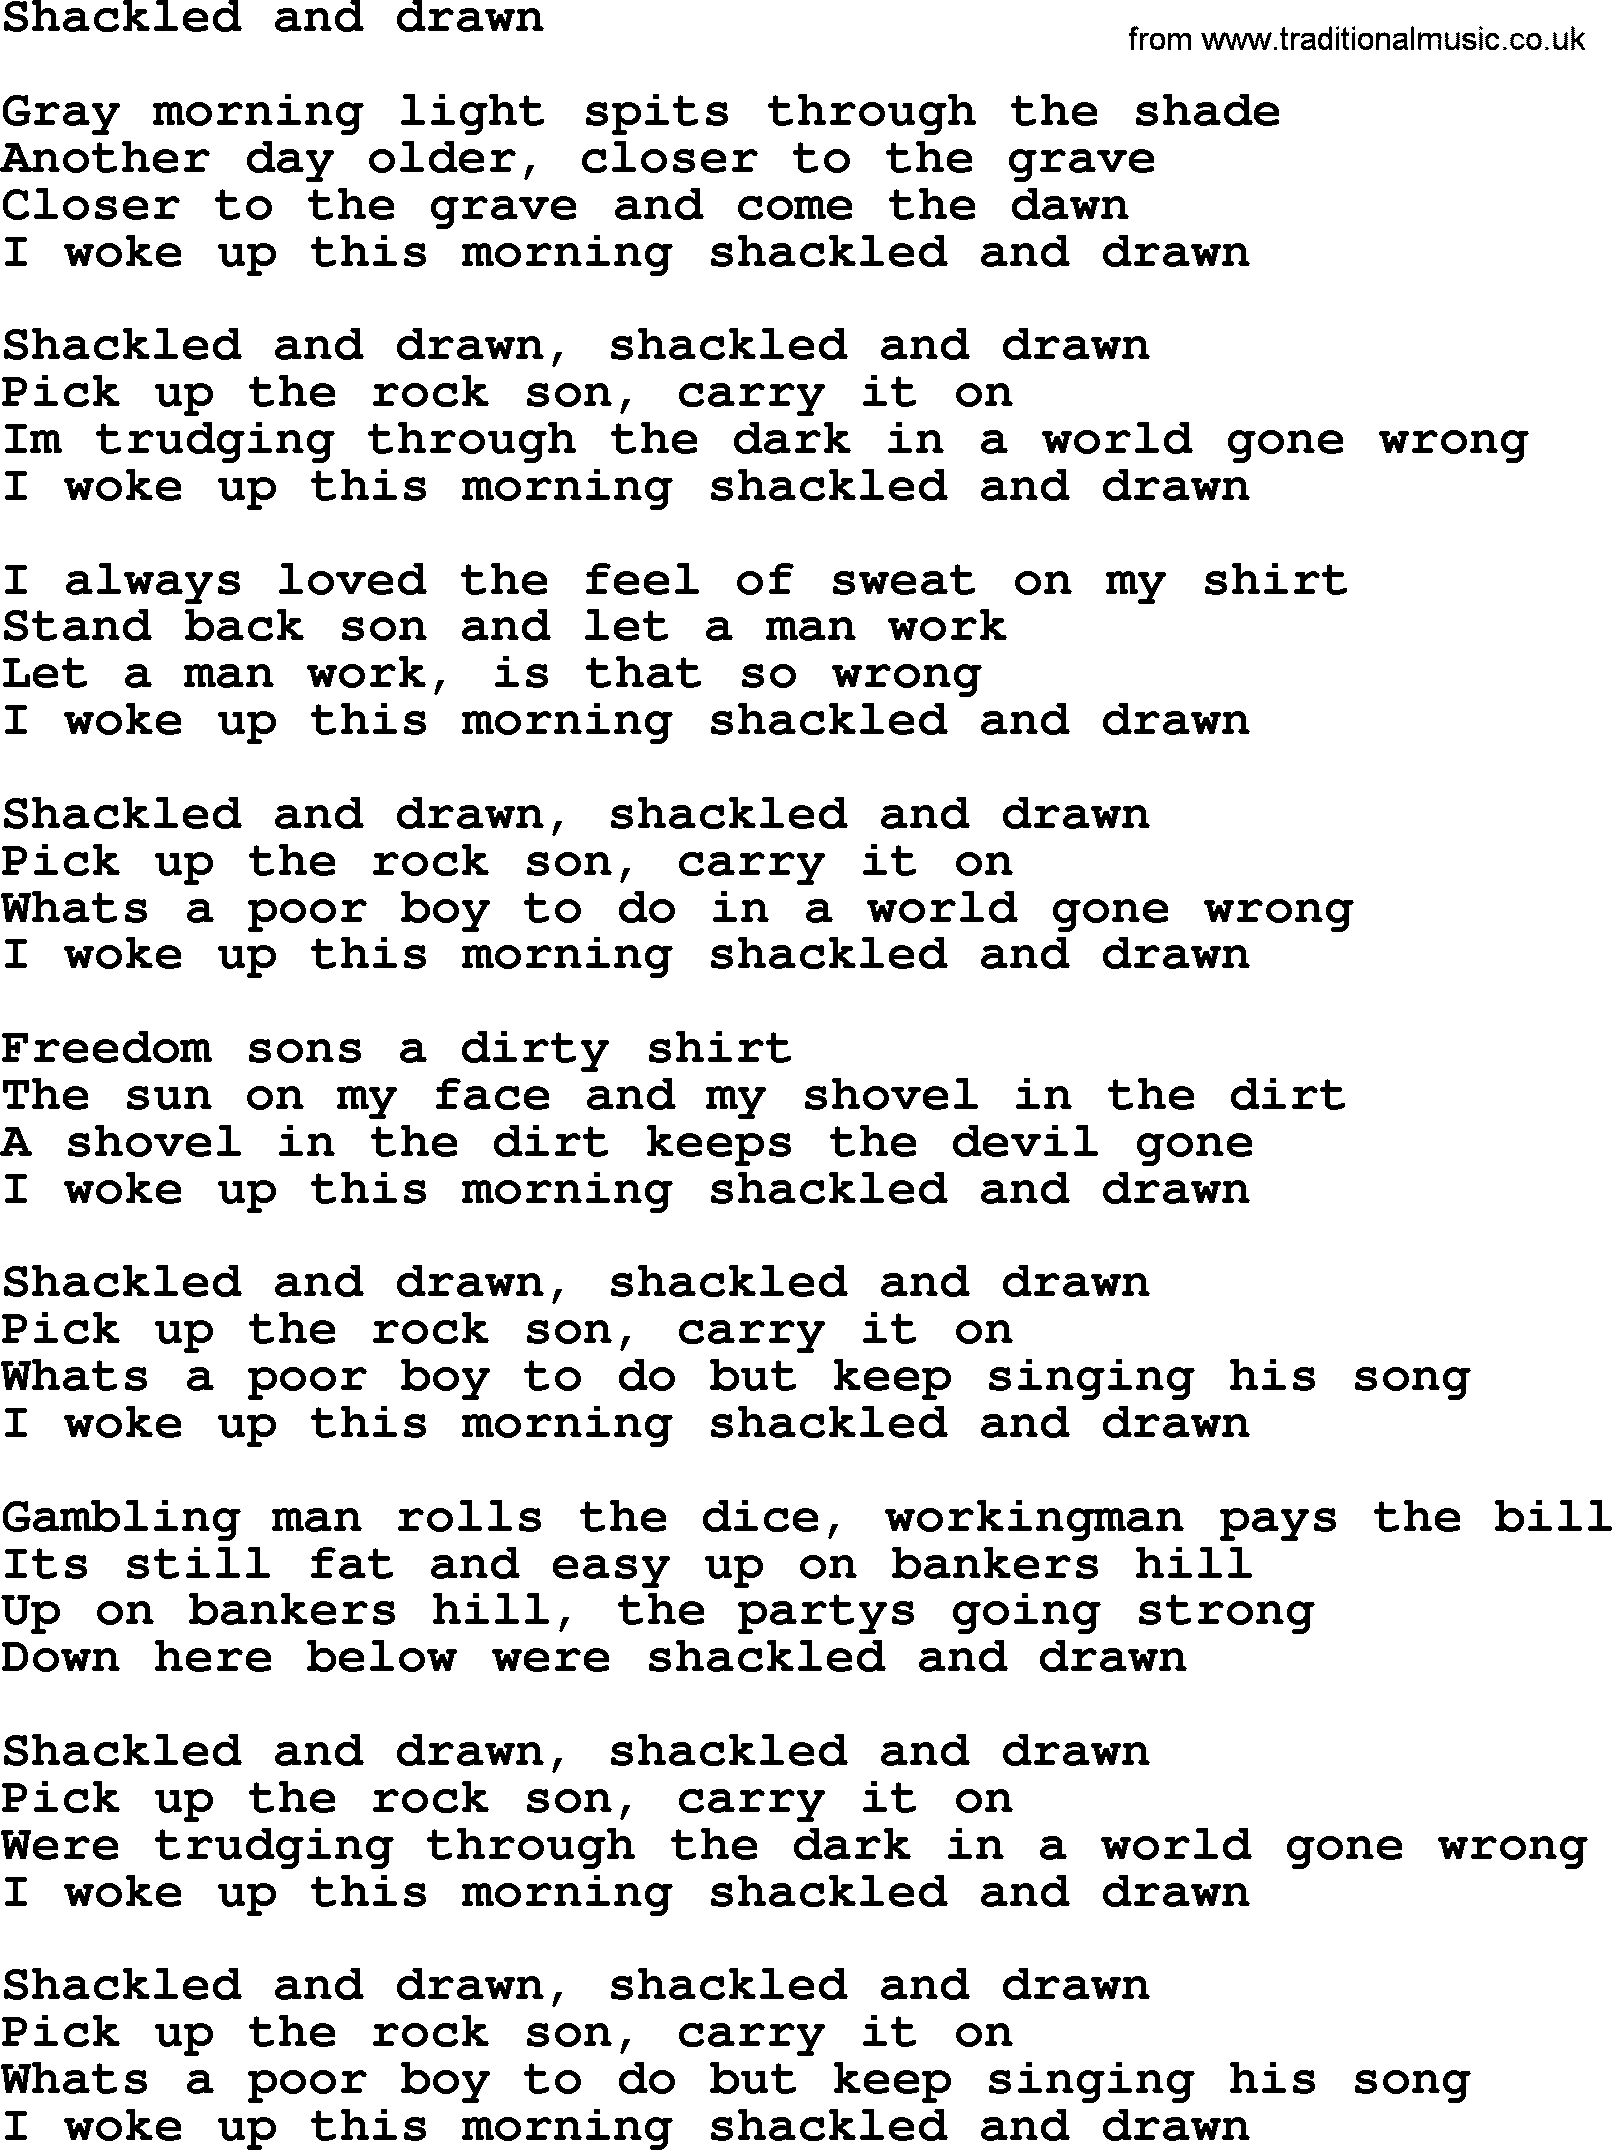 Bruce Springsteen song: Shackled And Drawn lyrics